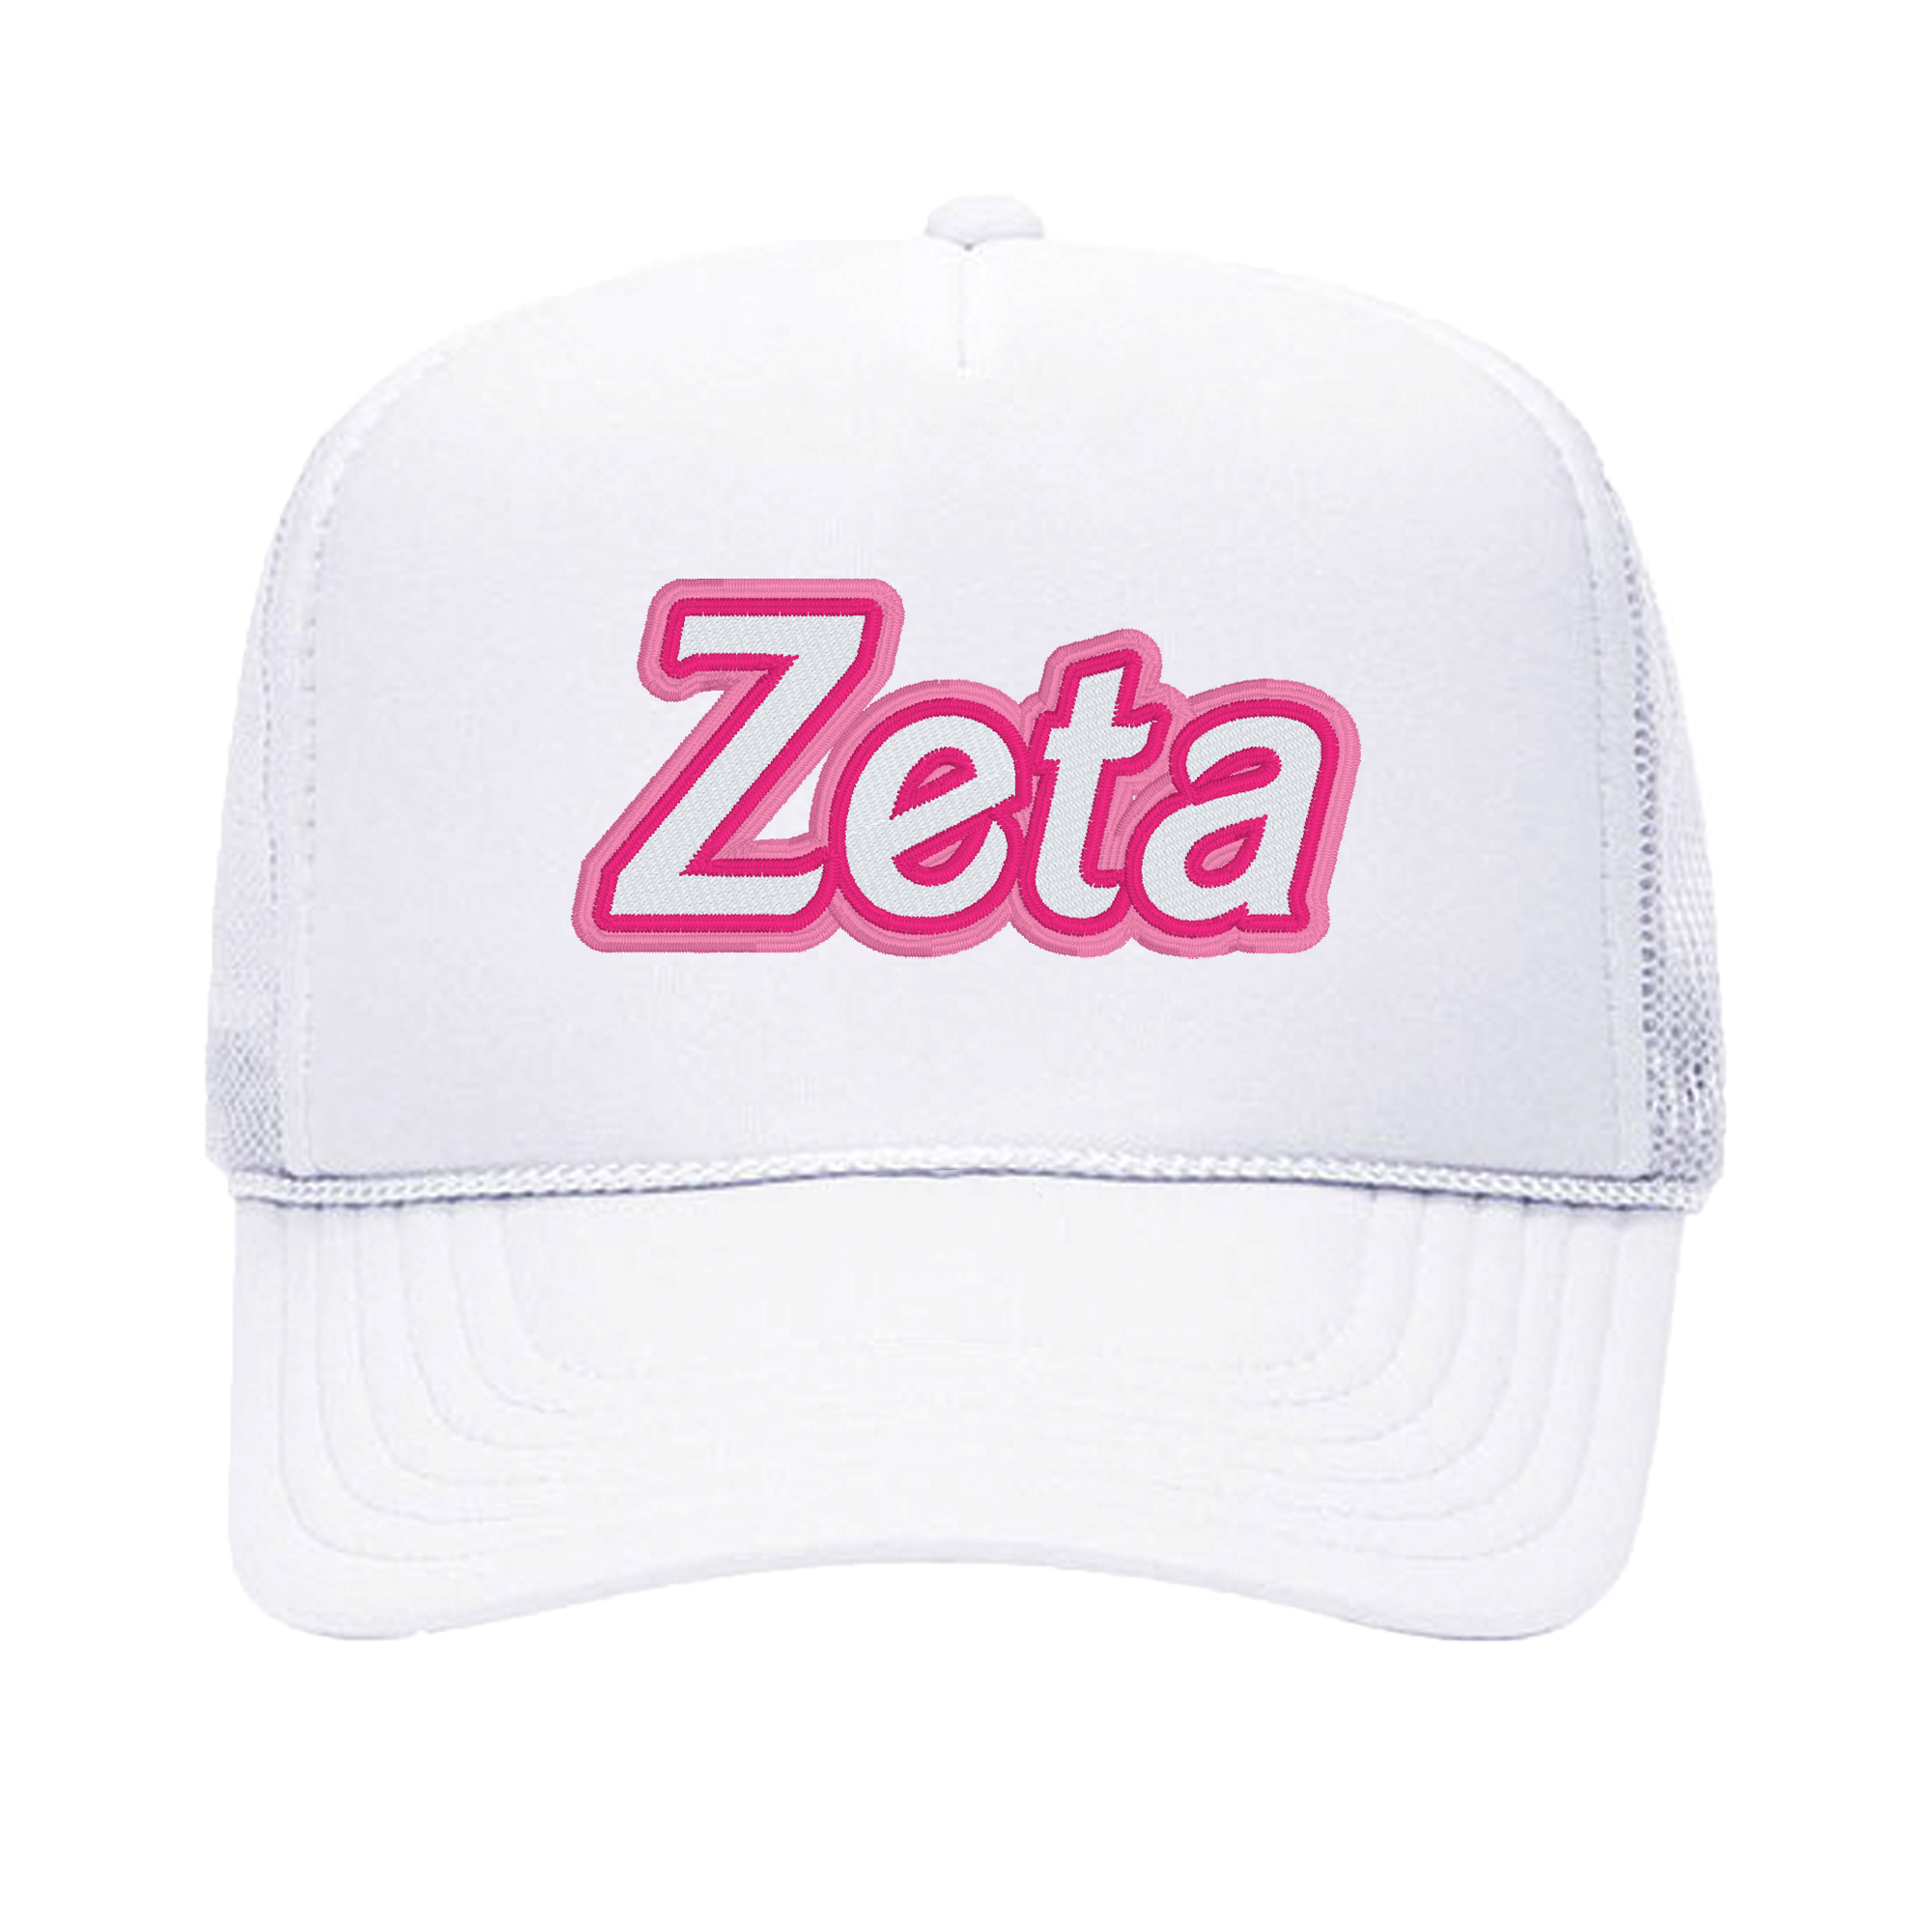 a white hat with the word zeta printed on it